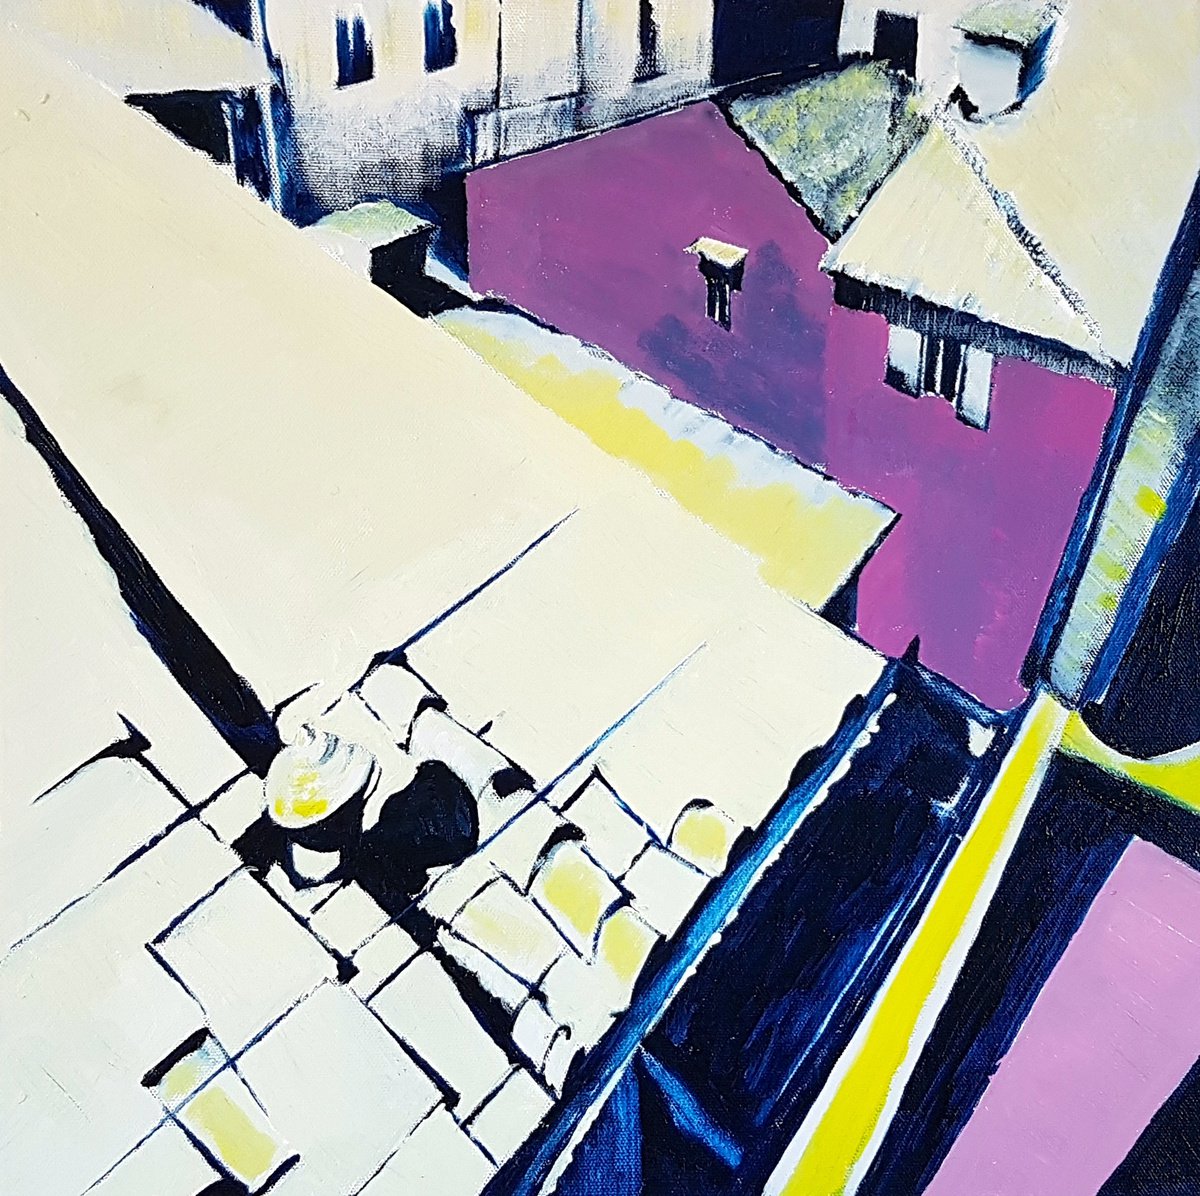 View over the roofs of a small Italian town by Kathrin Fl�ge